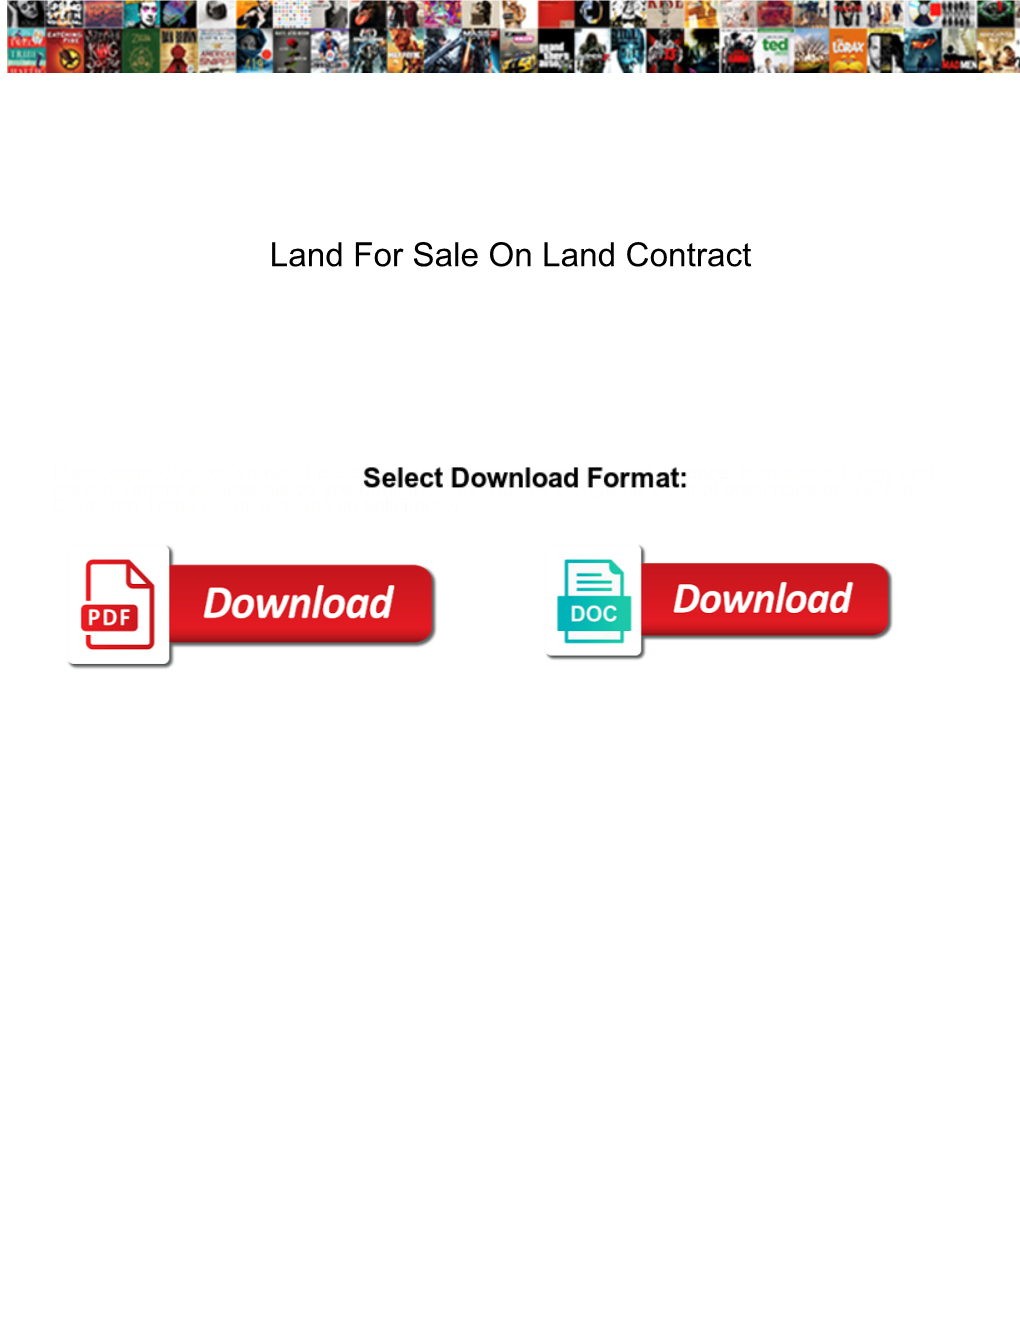 Land for Sale on Land Contract